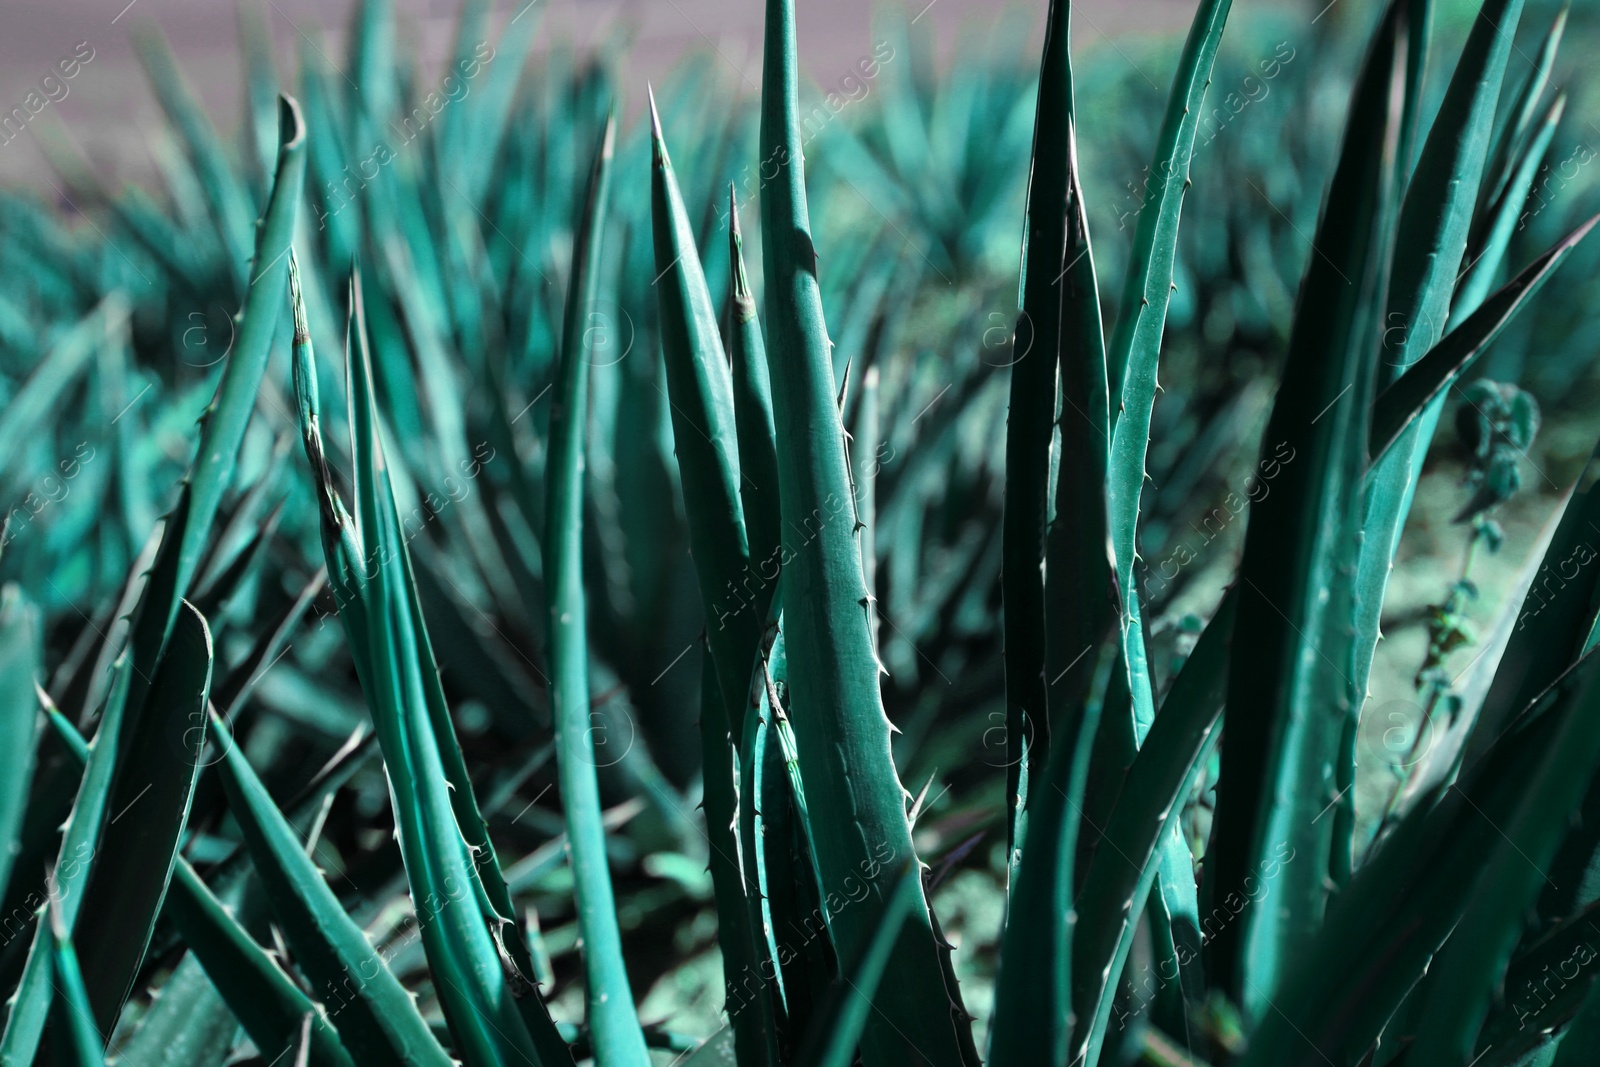 Photo of Closeup view of beautiful Agave plant growing outdoors